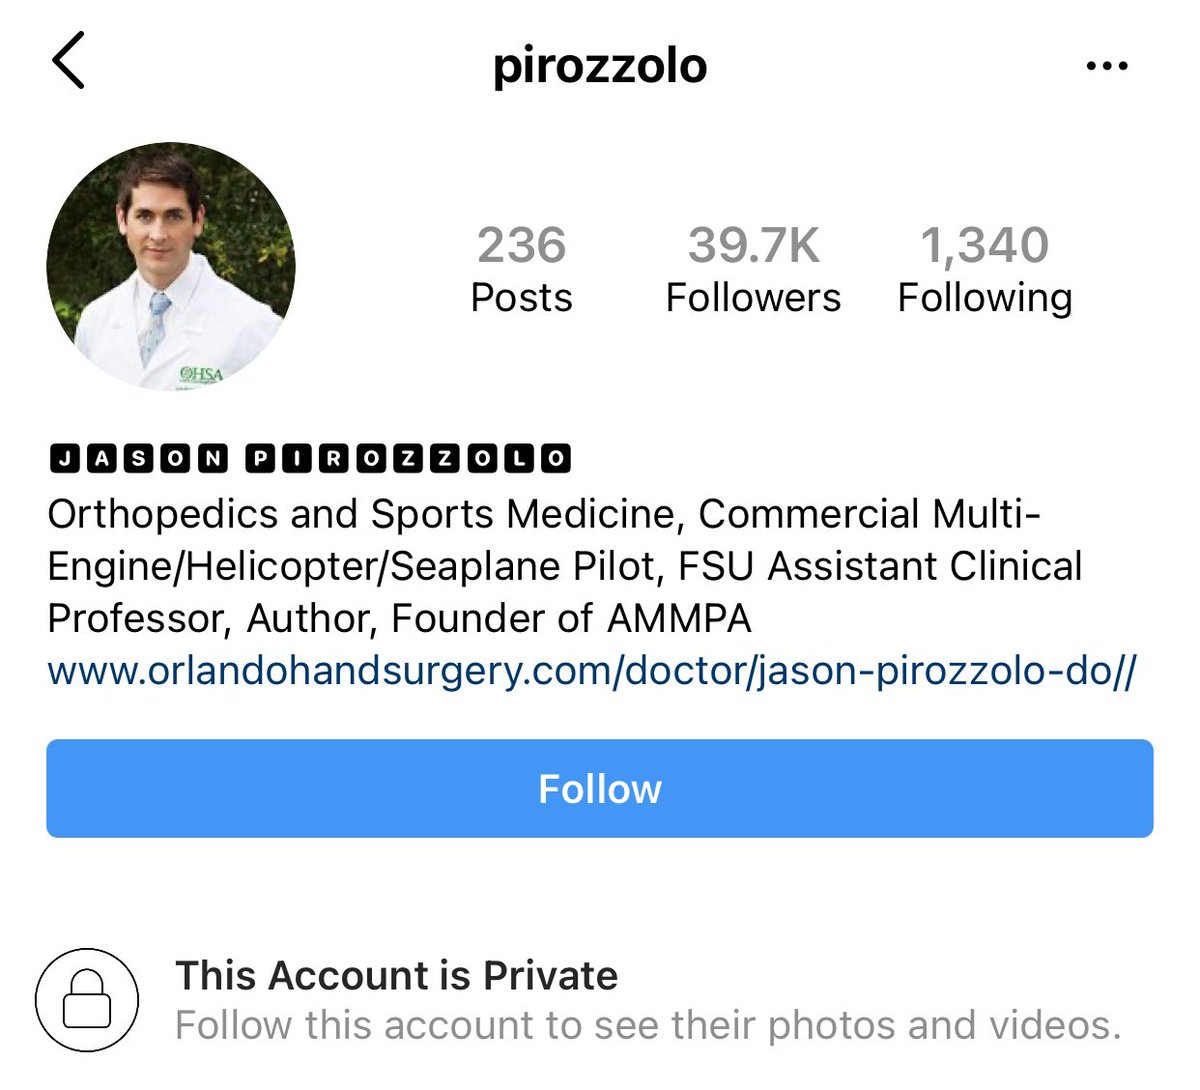 Savara Hastings’ Twitter account is also deleted. Dr. Jason Pirozzolo has locked his Instagram.